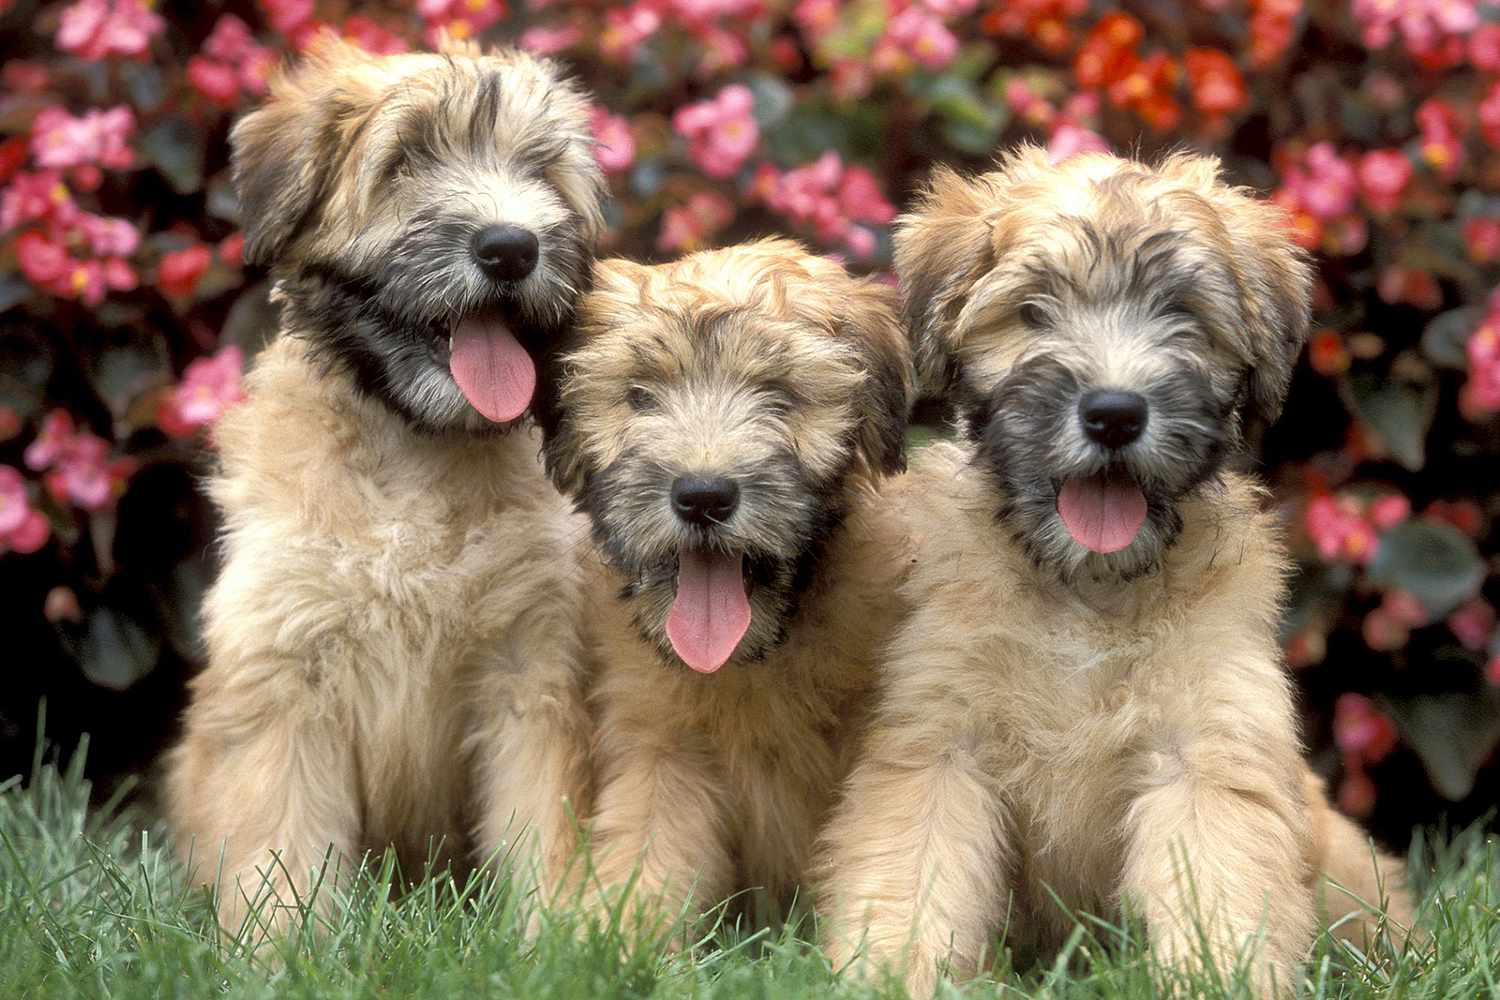 Three soft-coated wheaten puppies sit side by side in grass